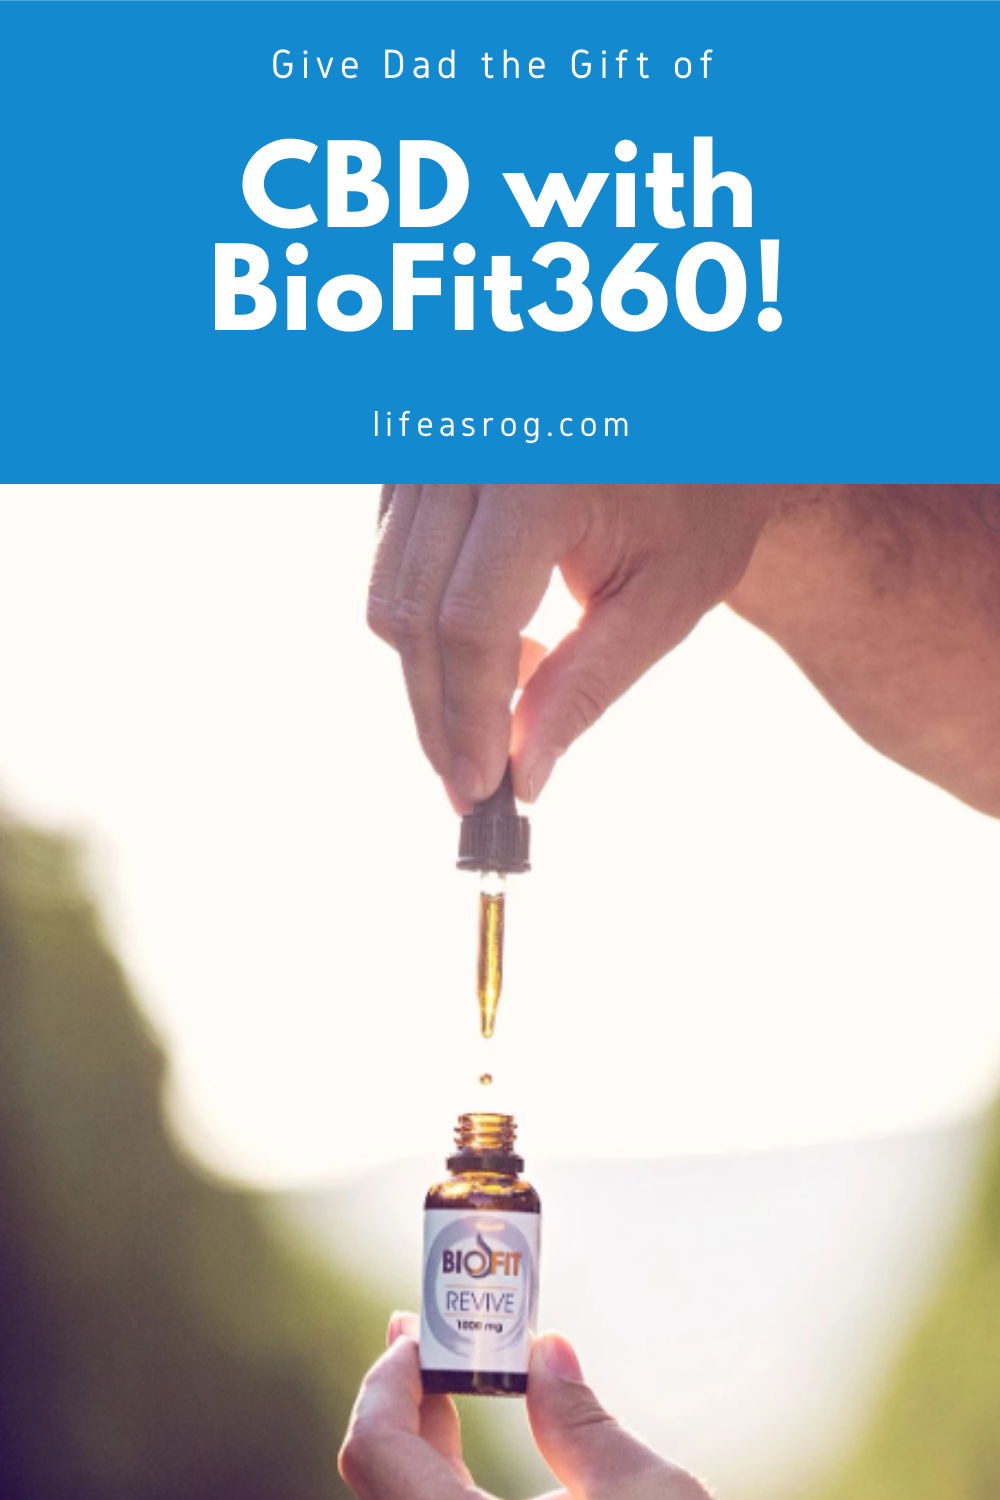 give dad the gift of cbd with biofit360!